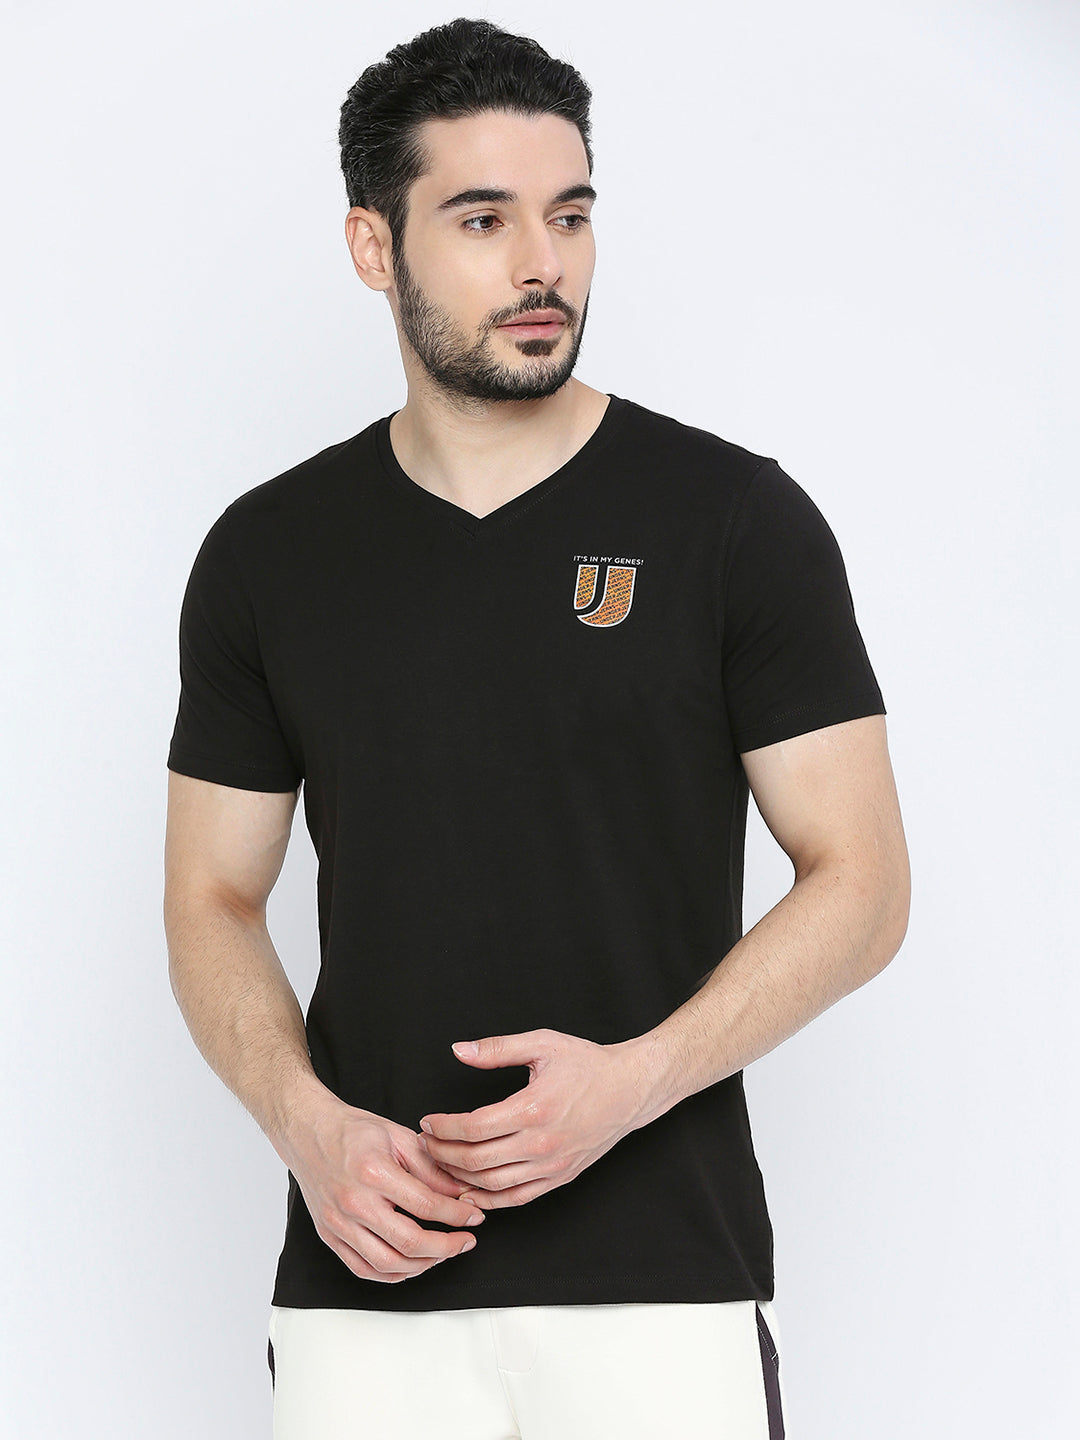 V-neck T-shirt with secret pocket to prevent theft, loss and pick